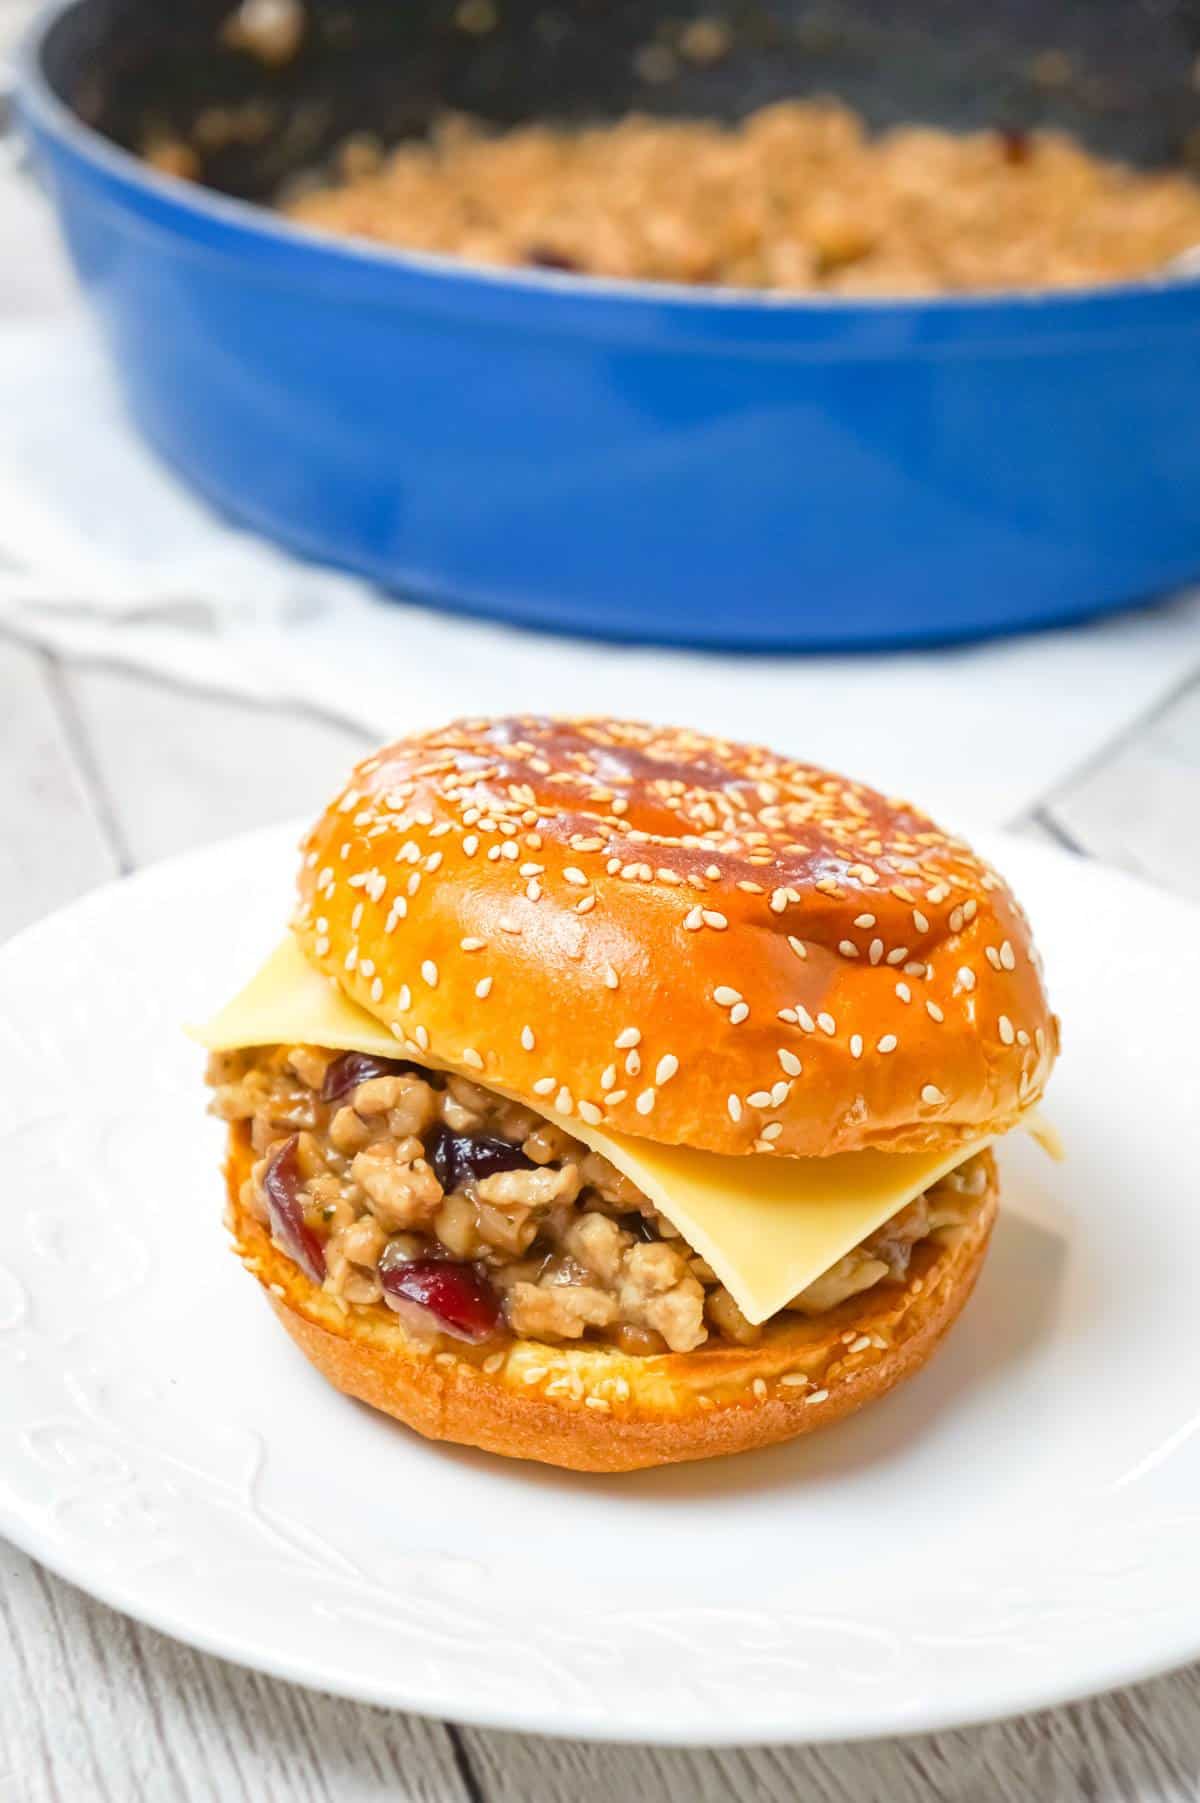 Turkey Dinner Sloppy Joes are an easy weeknight dinner recipe made with ground turkey and loaded with gravy, stove top stuffing mix, cranberry sauce and Havarti cheese all on served on Brioche buns.